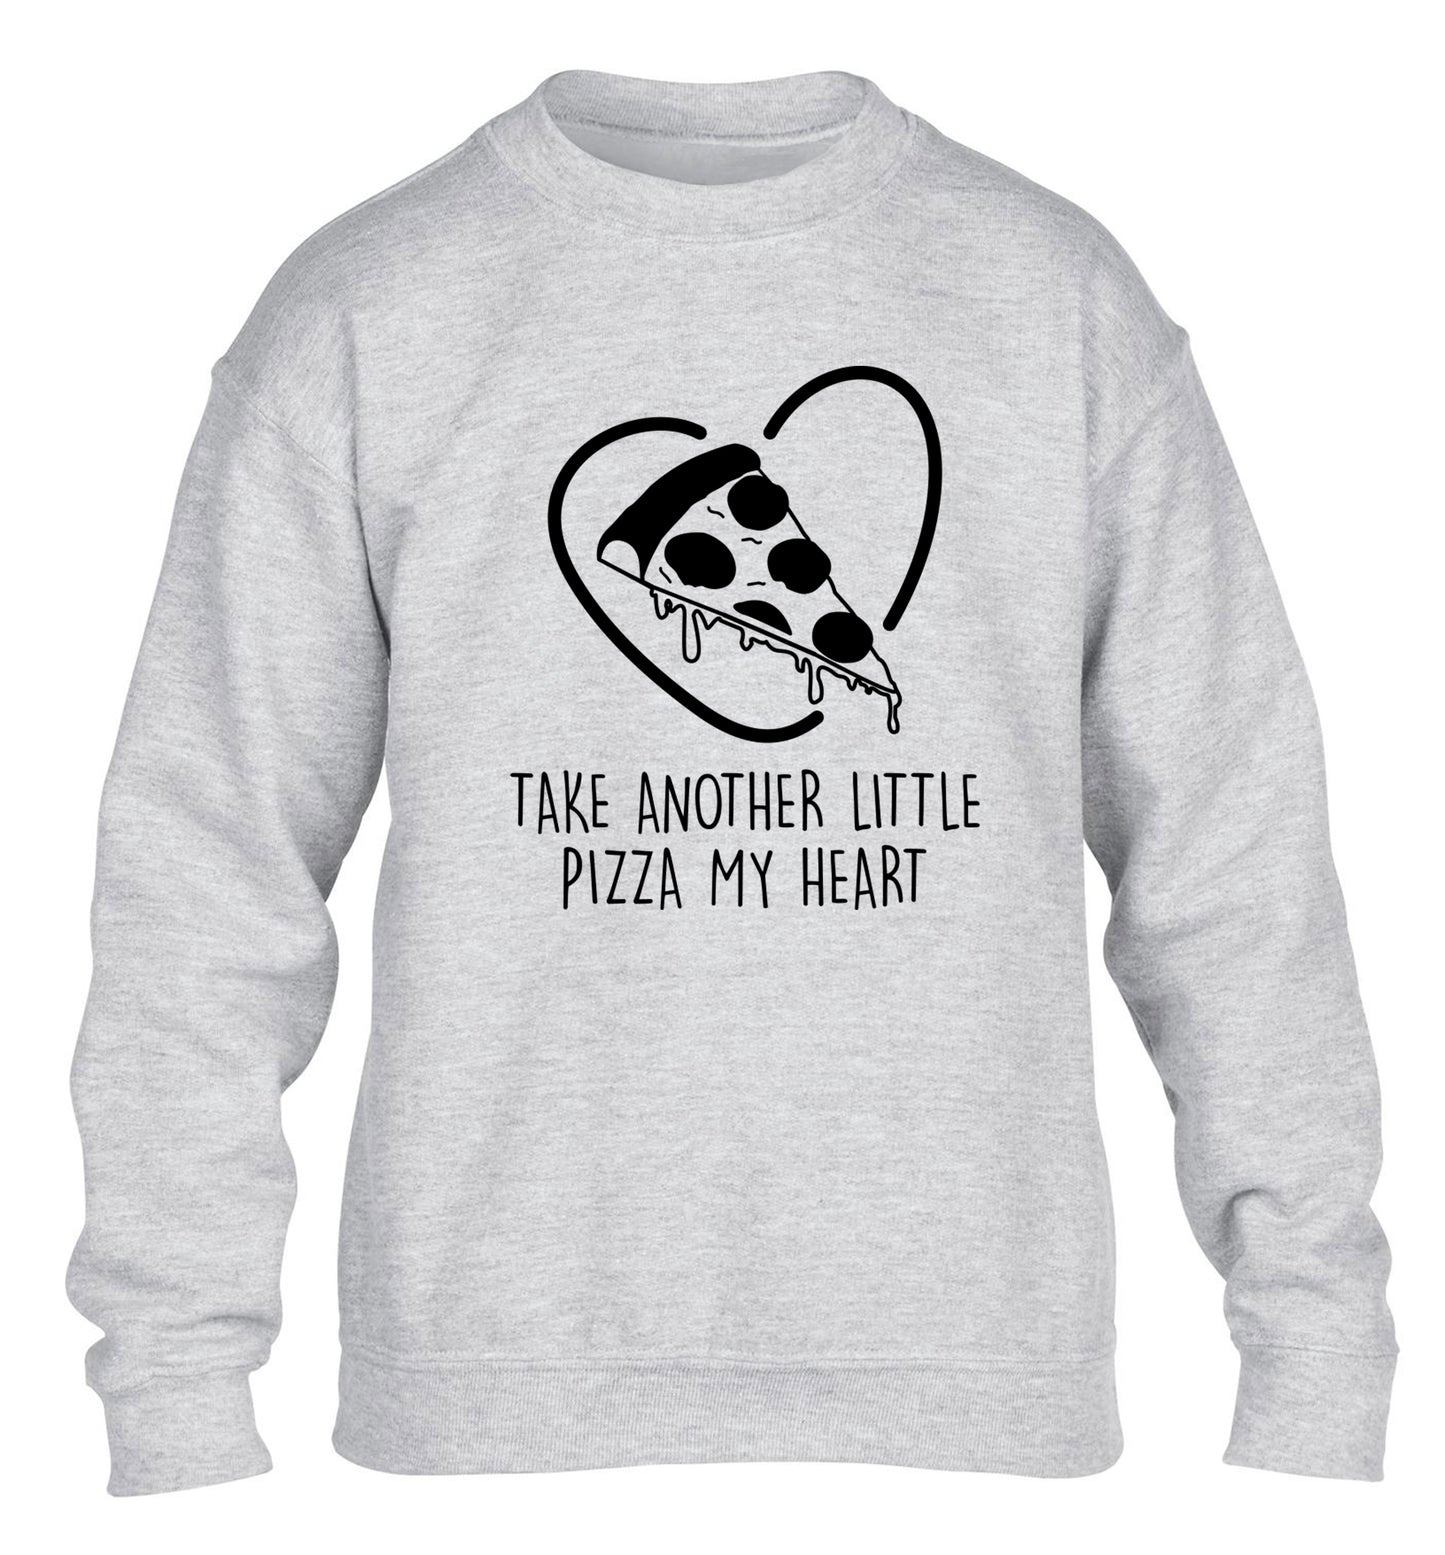 Take another little pizza my heart children's grey sweater 12-13 Years